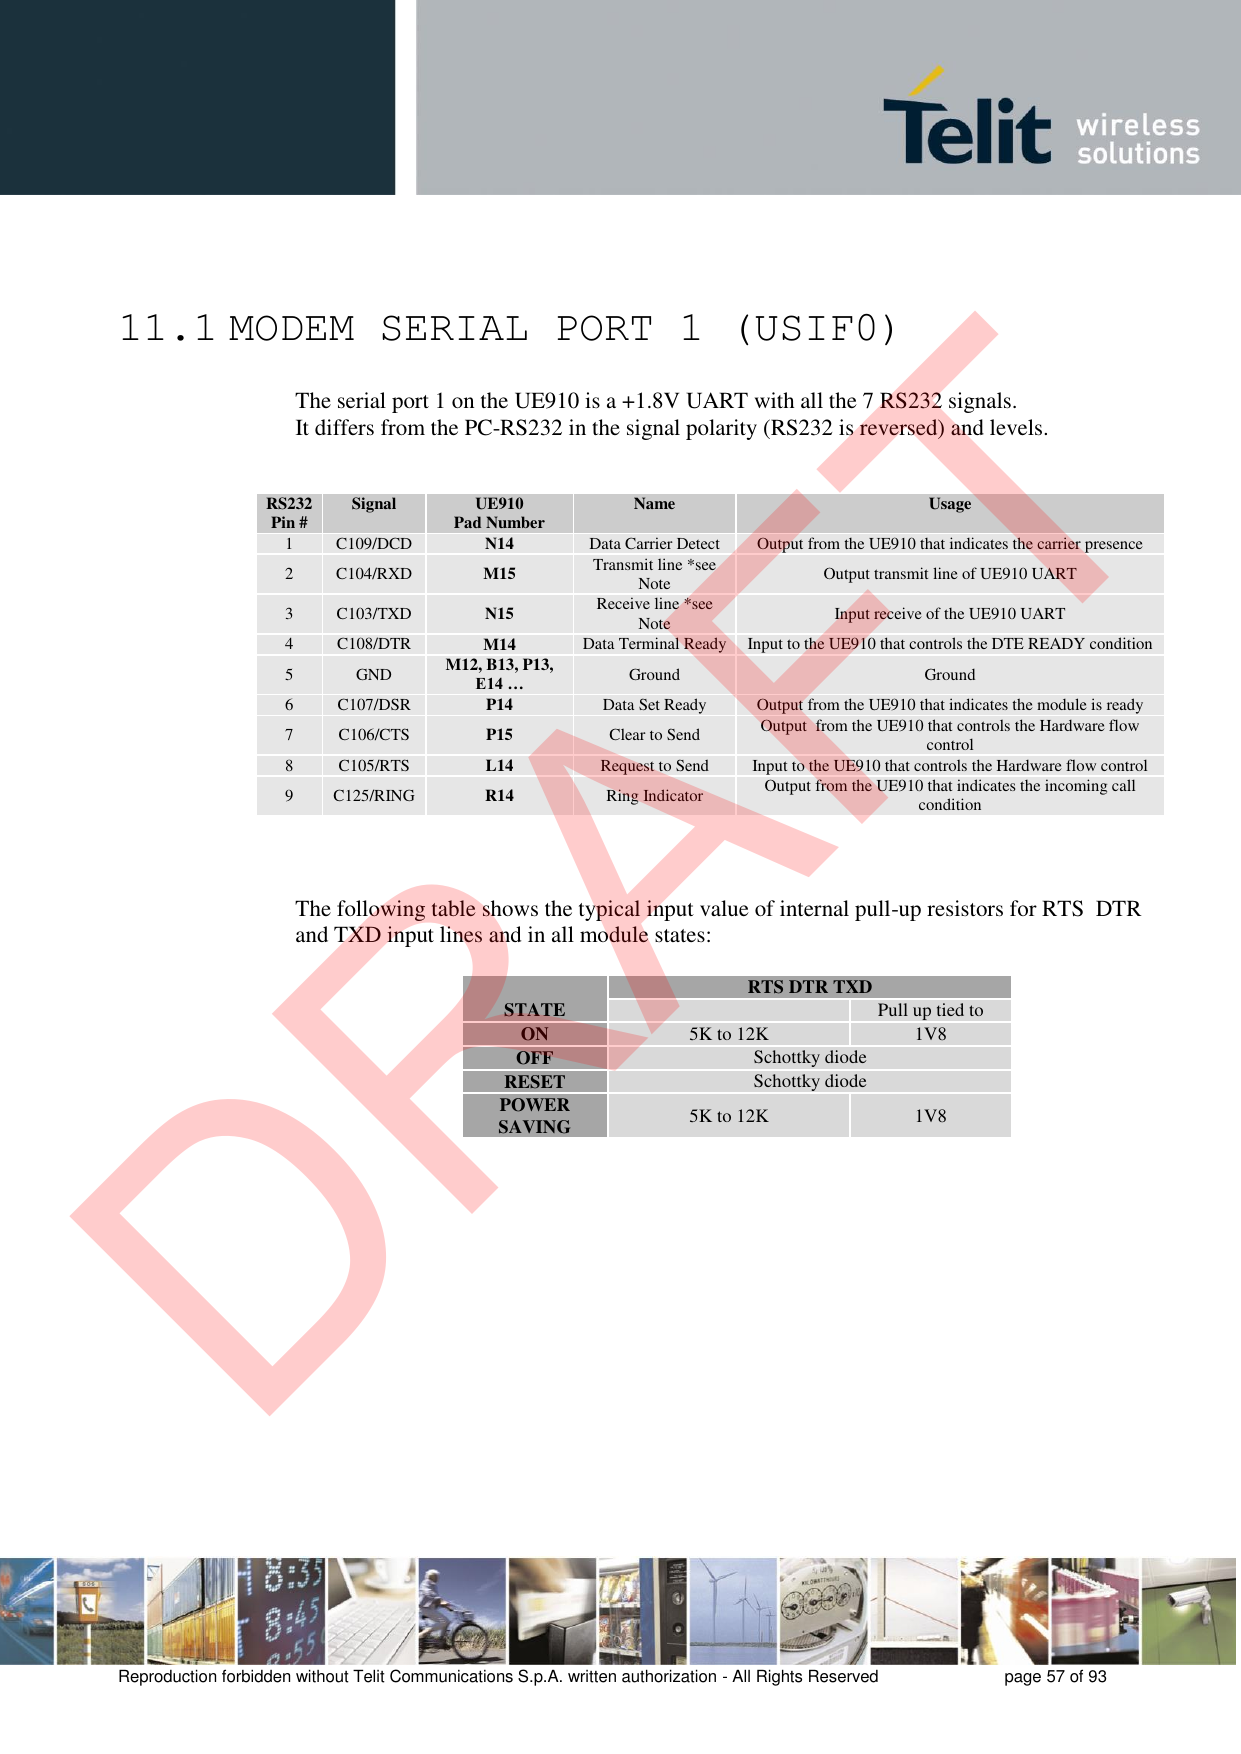 Reproduction forbidden without Telit Communications S.p.A. written authorization - All Rights Reserved  page 57 of 93 11.1 MODEM SERIAL PORT 1 (USIF0) The serial port 1 on the UE910 is a +1.8V UART with all the 7 RS232 signals.  It differs from the PC-RS232 in the signal polarity (RS232 is reversed) and levels. RS232 Pin # Signal UE910 Pad Number Name Usage 1 C109/DCD N14 Data Carrier Detect Output from the UE910 that indicates the carrier presence 2 C104/RXD M15 Transmit line *see Note Output transmit line of UE910 UART 3 C103/TXD N15 Receive line *see Note Input receive of the UE910 UART 4 C108/DTR M14 Data Terminal Ready Input to the UE910 that controls the DTE READY condition 5 GND M12, B13, P13, E14 … Ground Ground 6 C107/DSR P14 Data Set Ready Output from the UE910 that indicates the module is ready 7 C106/CTS P15 Clear to Send Output  from the UE910 that controls the Hardware flow control 8 C105/RTS L14 Request to Send Input to the UE910 that controls the Hardware flow control 9 C125/RING R14 Ring Indicator Output from the UE910 that indicates the incoming call condition The following table shows the typical input value of internal pull-up resistors for RTS  DTR and TXD input lines and in all module states: STATE RTS DTR TXD Pull up tied to ON 5K to 12K 1V8 OFF Schottky diode RESET Schottky diode POWER SAVING 5K to 12K 1V8 DRAFT